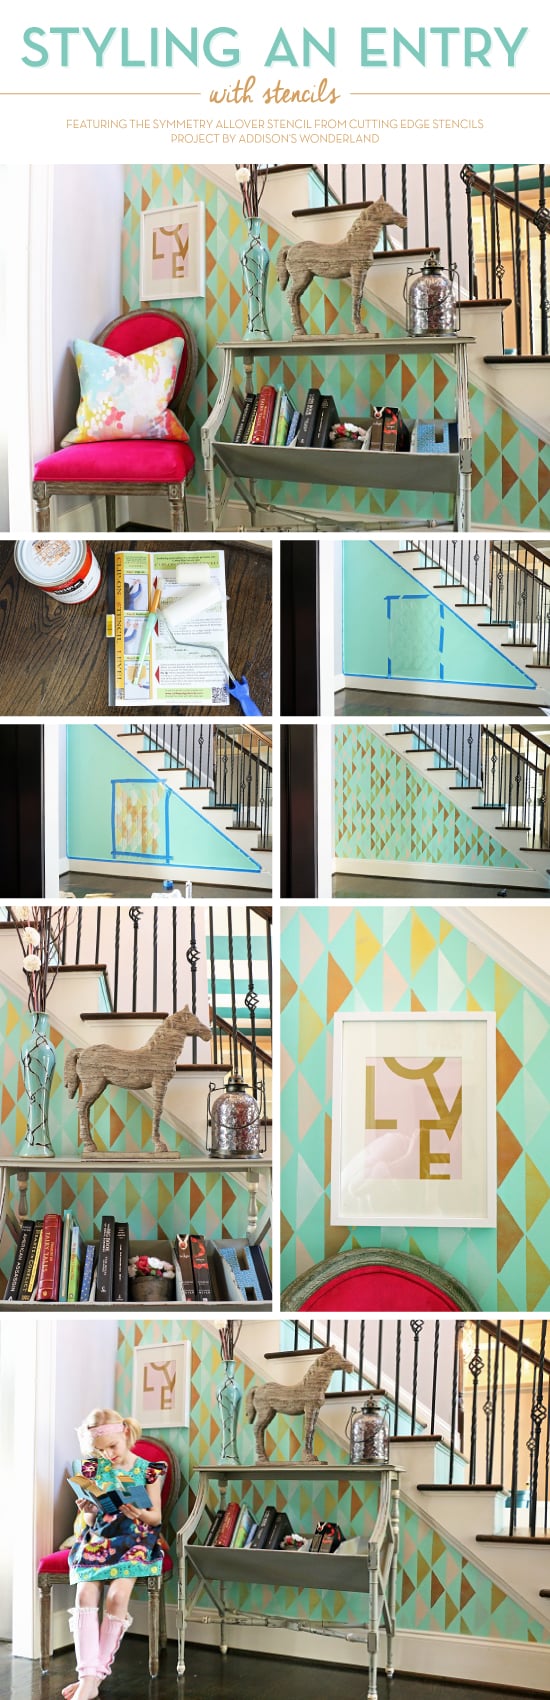 Cutting Edge Stencils share a DIY stenciled entryway using the Symmetry Allover stencil pattern on an entryway wall. http://www.cuttingedgestencils.com/symmetry-geometric-stencil-pattern.html